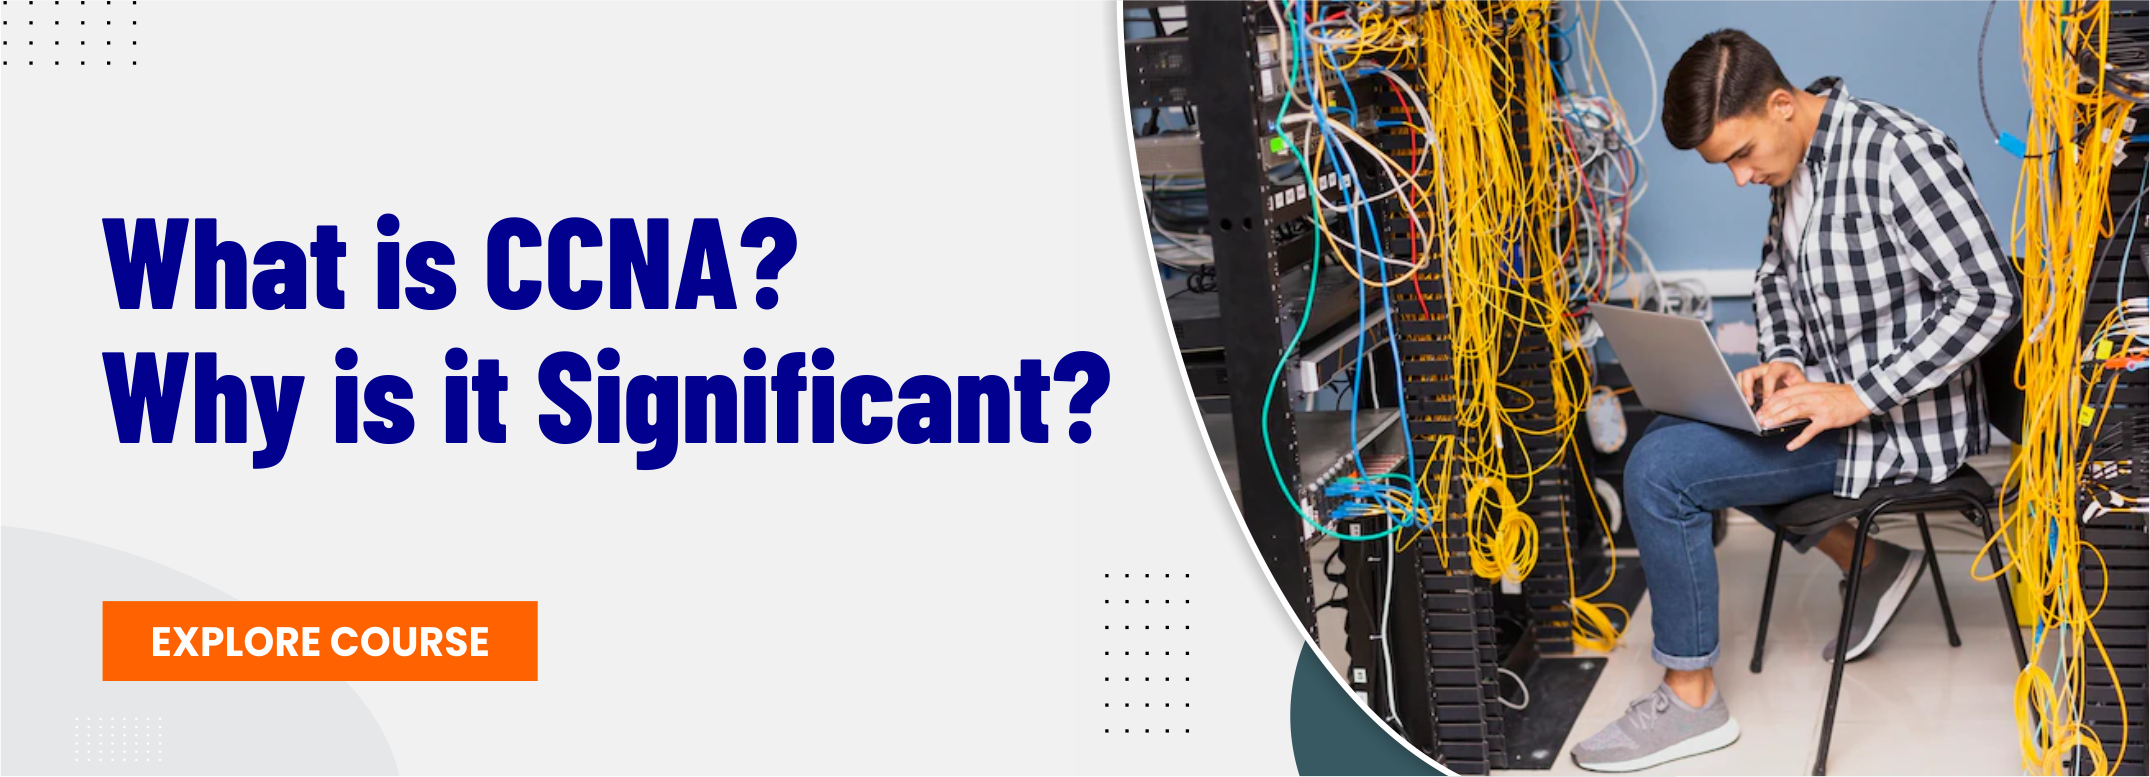 What is CCNA?
Why is it Significant?

EXPLORE COURSE ca